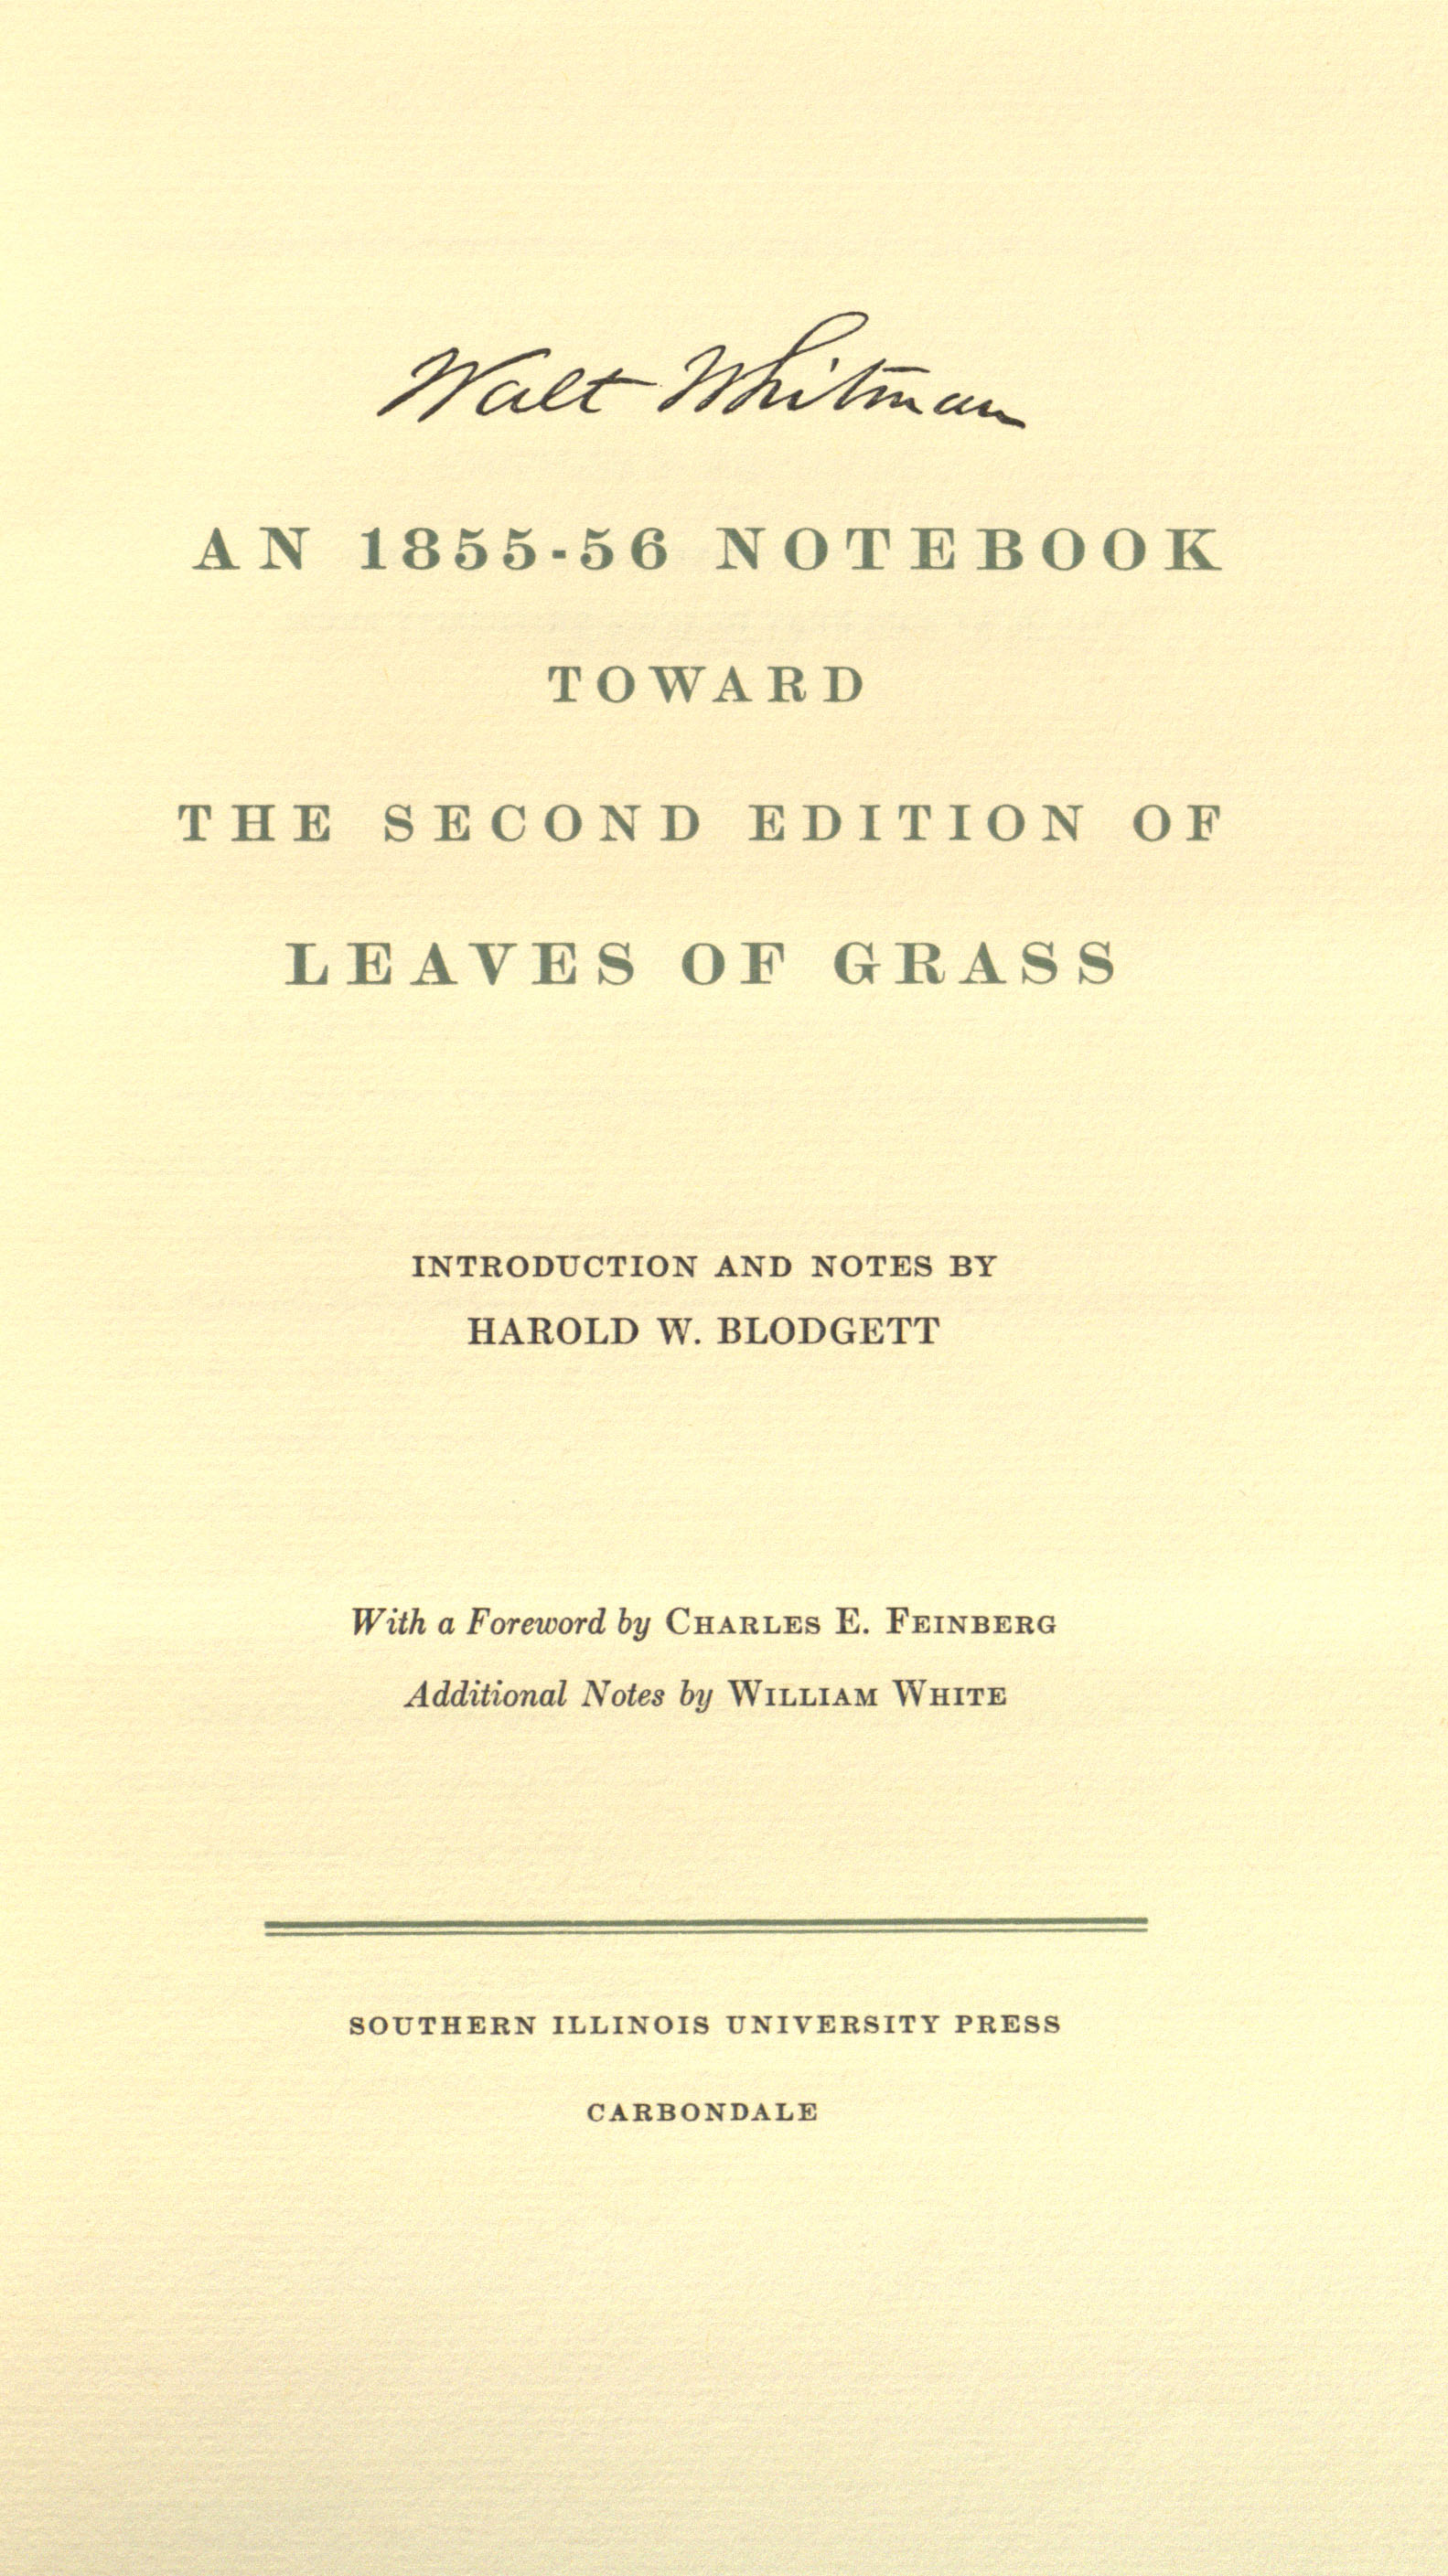 An 1855-56 Notebook Toward the Second Edition of Leaves of Grass